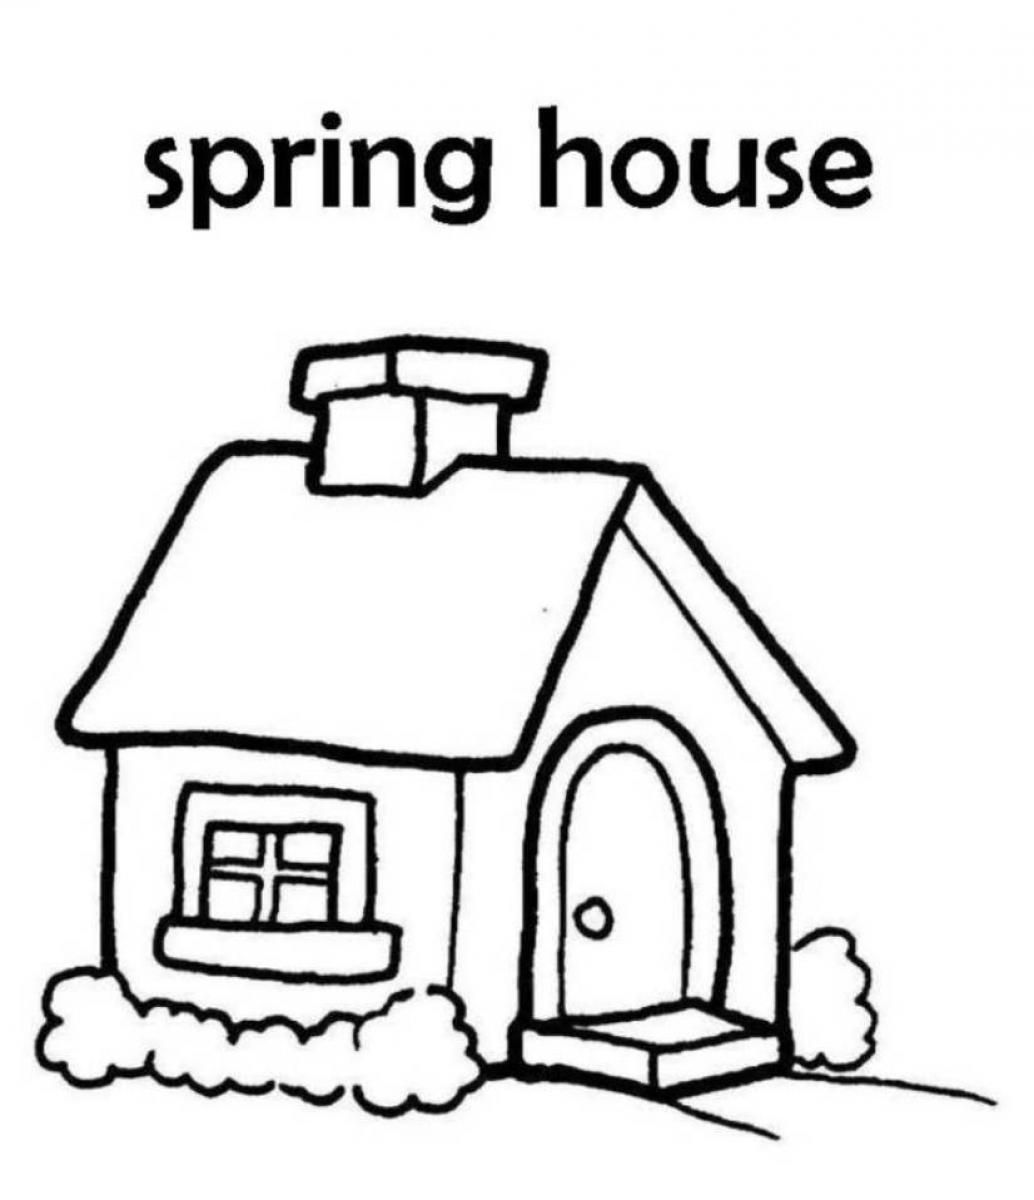 Cartoon House Coloring Pages Coloring Pages For All Ages